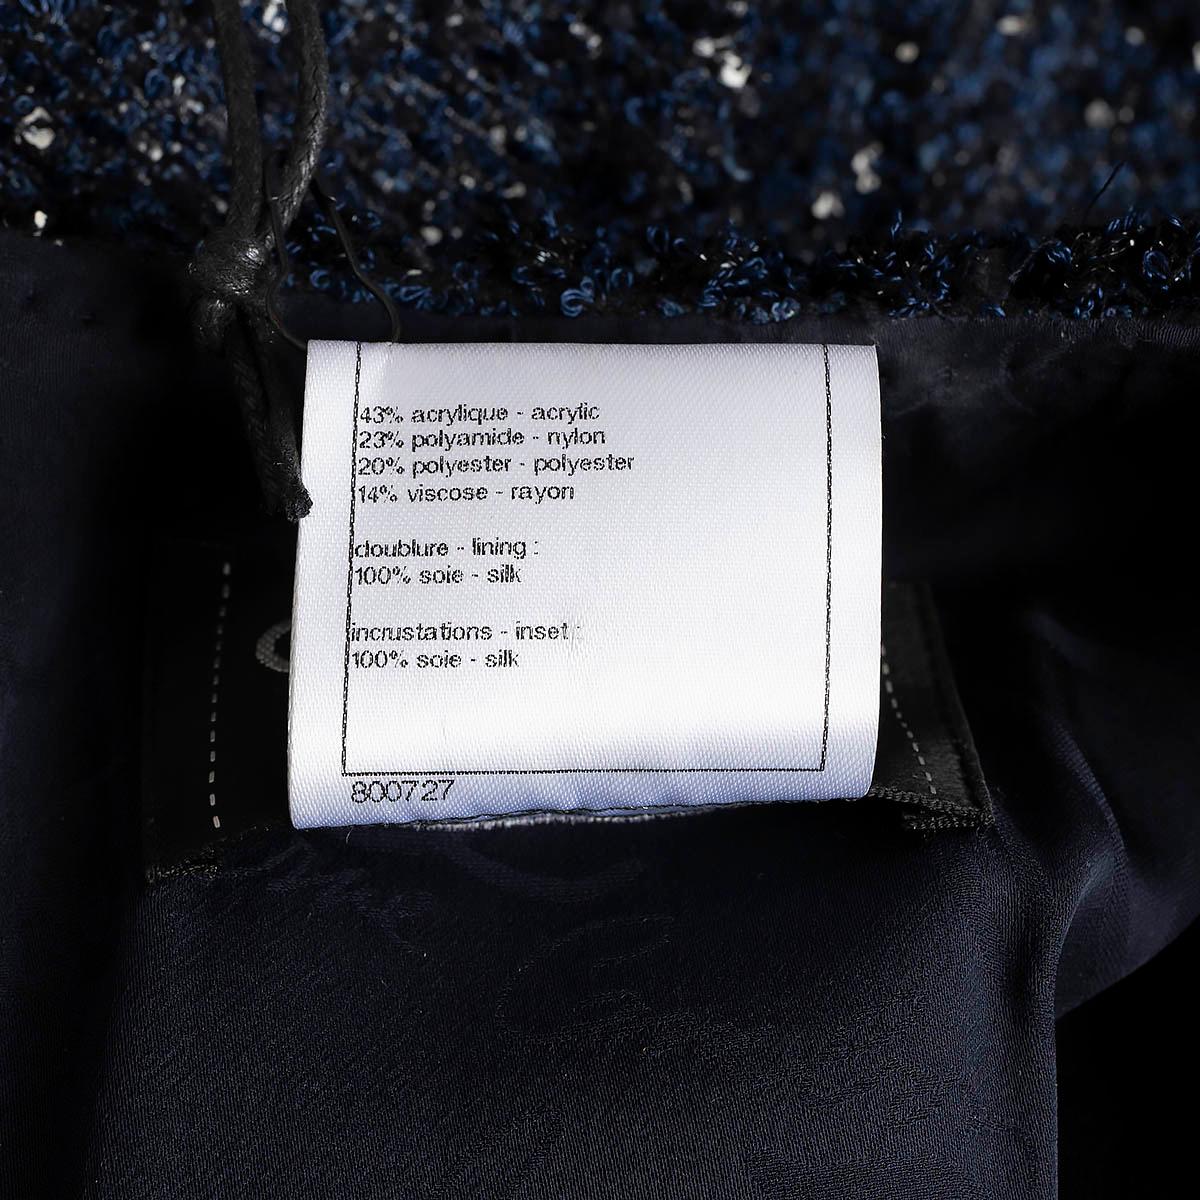 CHANEL navy & black 2012 12P PANELLED TWEED Dress 38 S For Sale 5